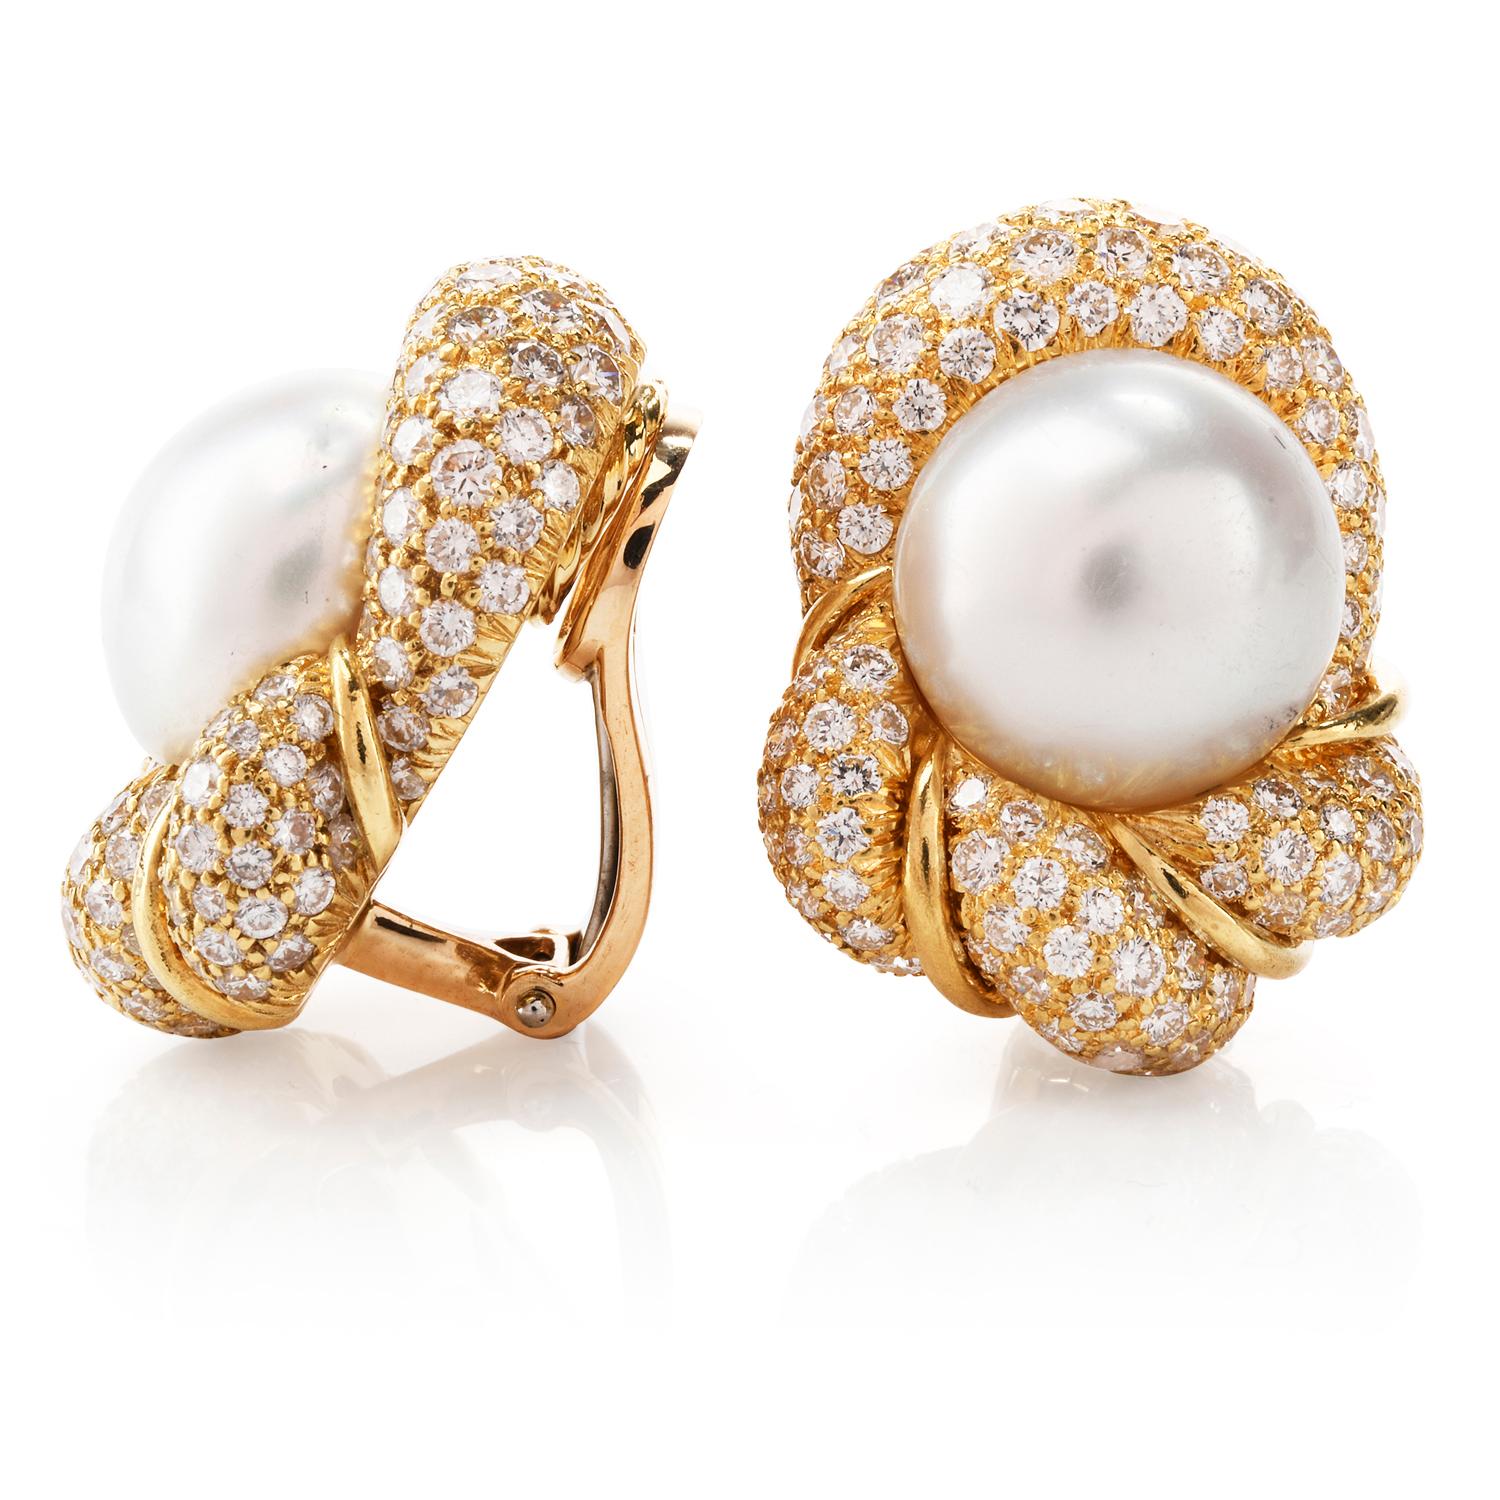 These Henry Dunay designed earring were created to encompass these 2 beautiful South Sea Pearls appx. 13mm in diameter.

Crafted in 18K yellow gold, each earring has been filled with pave set round diamonds cumulatively weighing approx. 7.63 carats